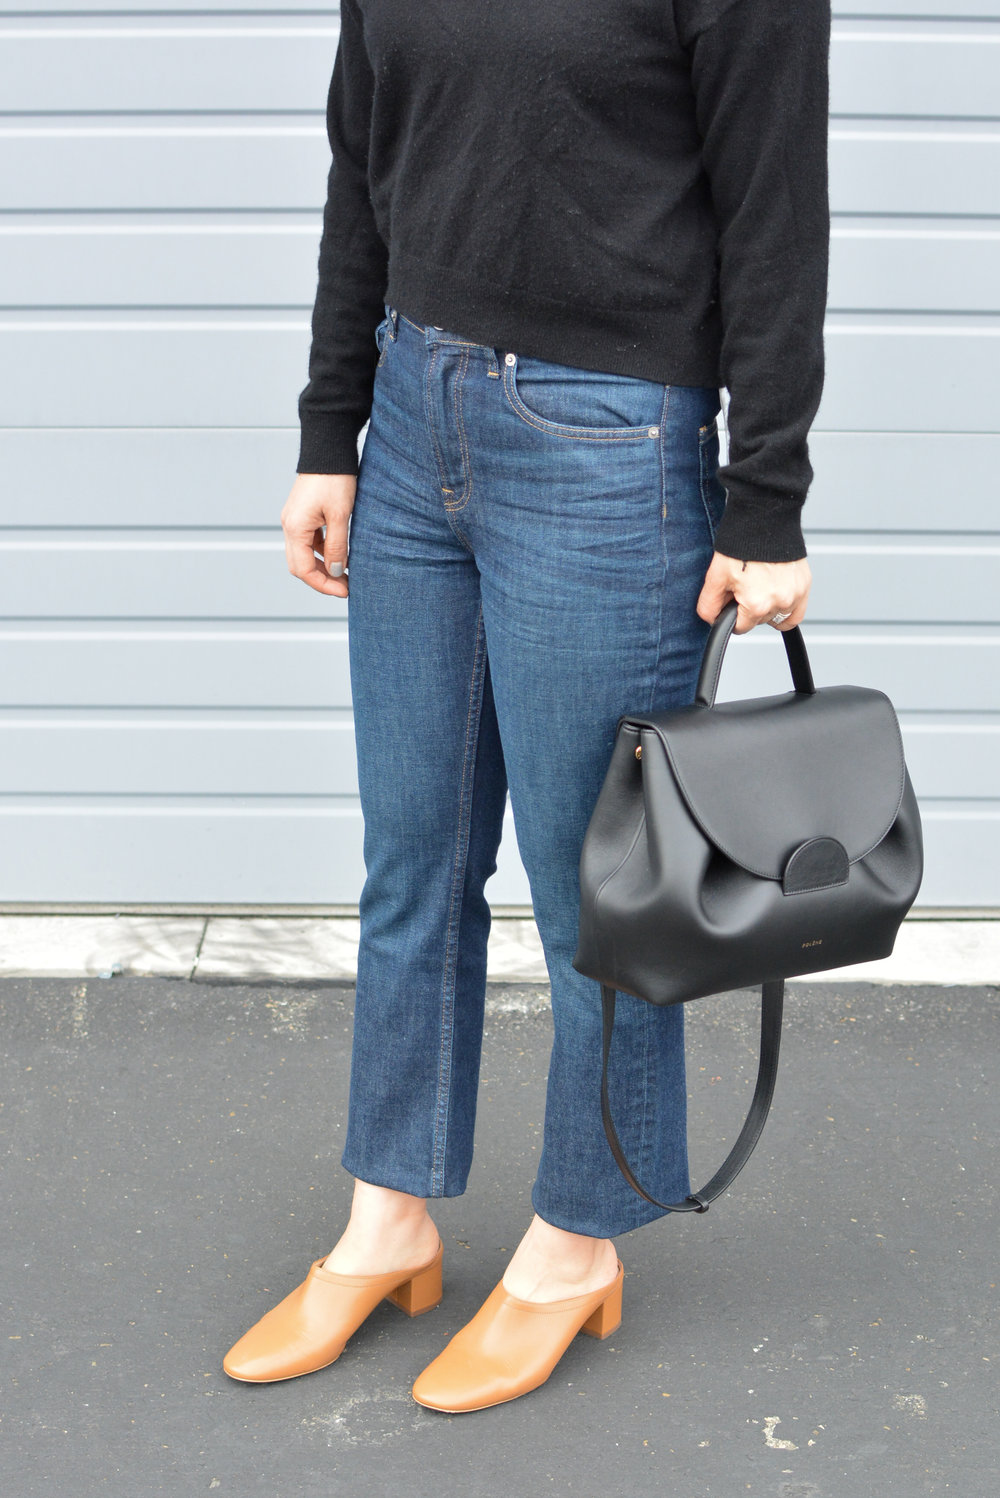 everlane day heel review wide feet